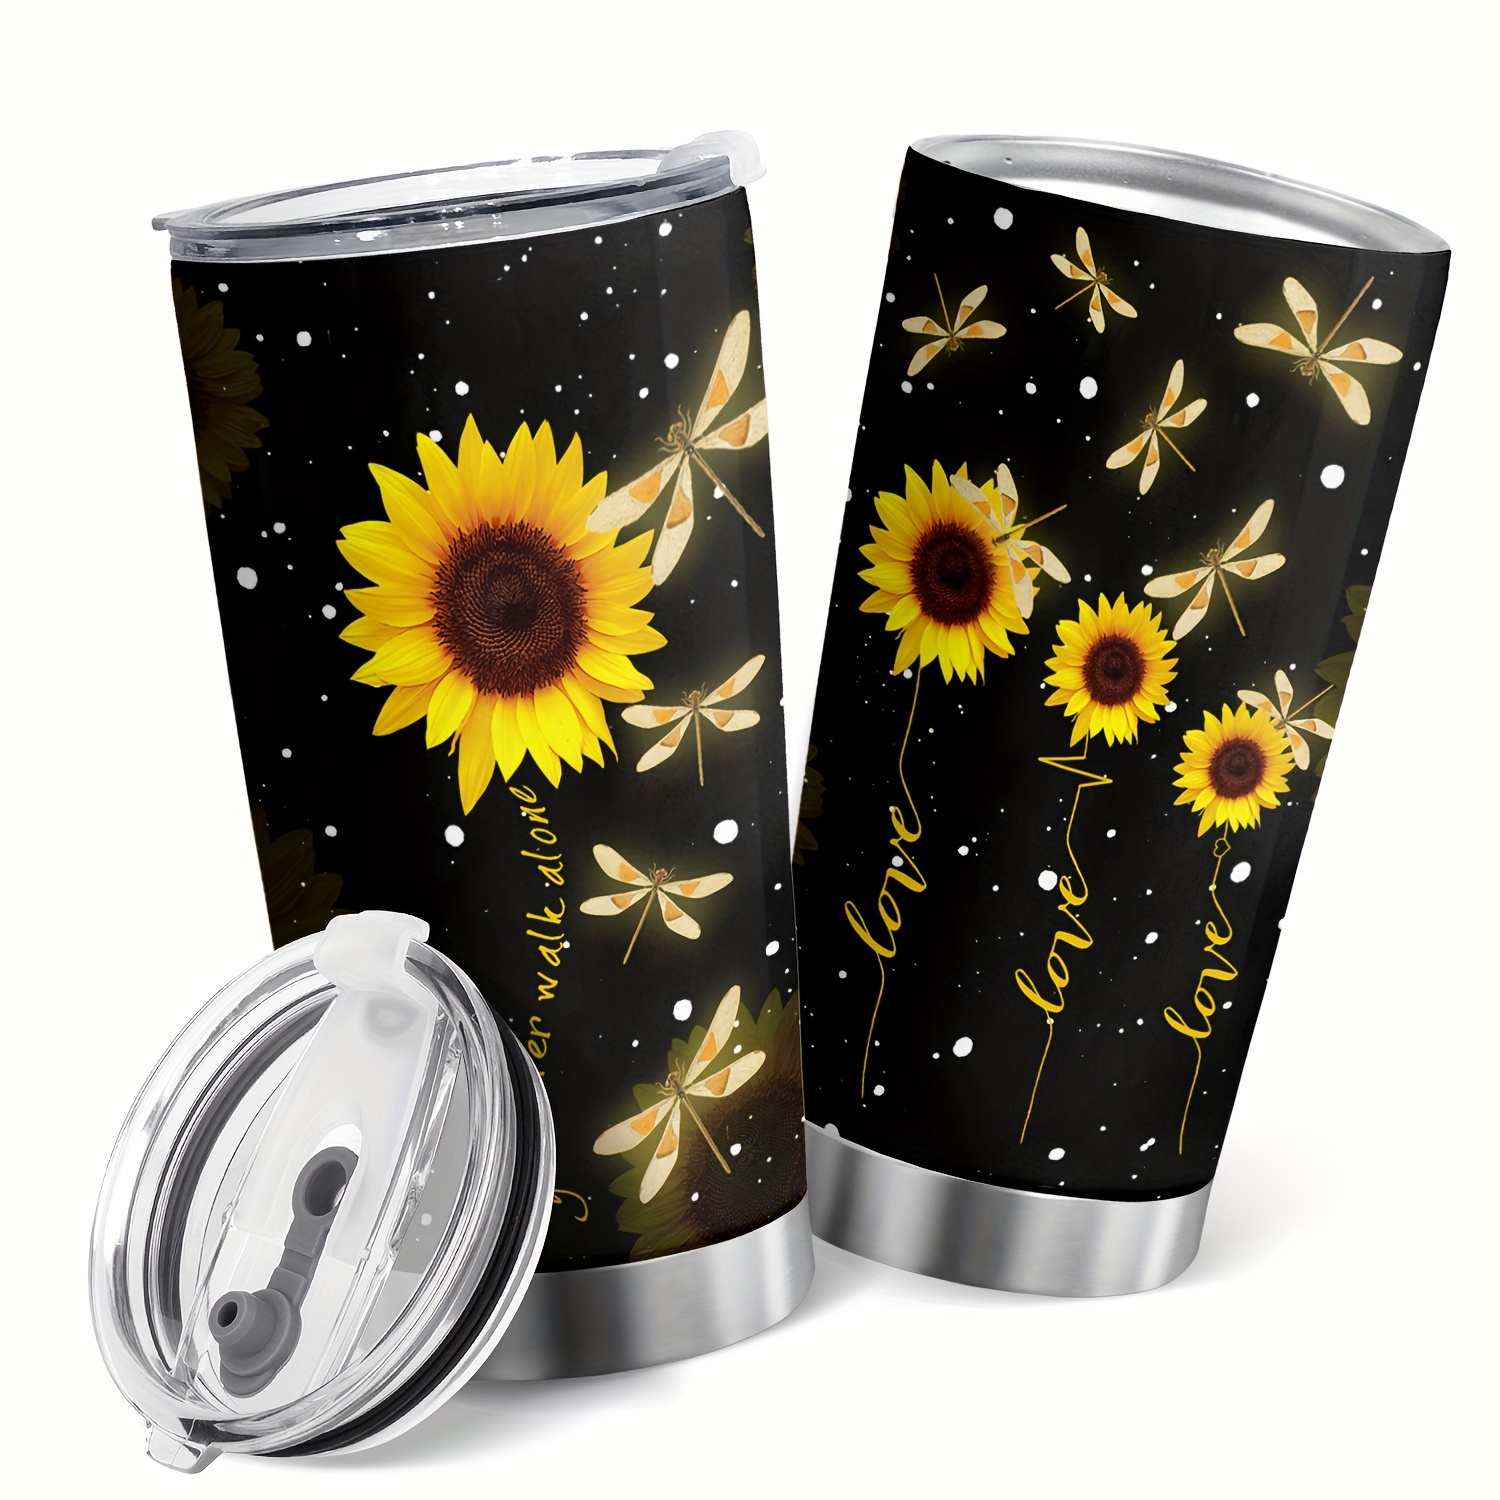 

20oz Sunflower & Dragonfly Stainless Steel Tumbler, Vacuum Insulated Travel Coffee Mug, Double-wall Multipurpose Cup, Hand Wash Only, Reusable With No Electricity Needed